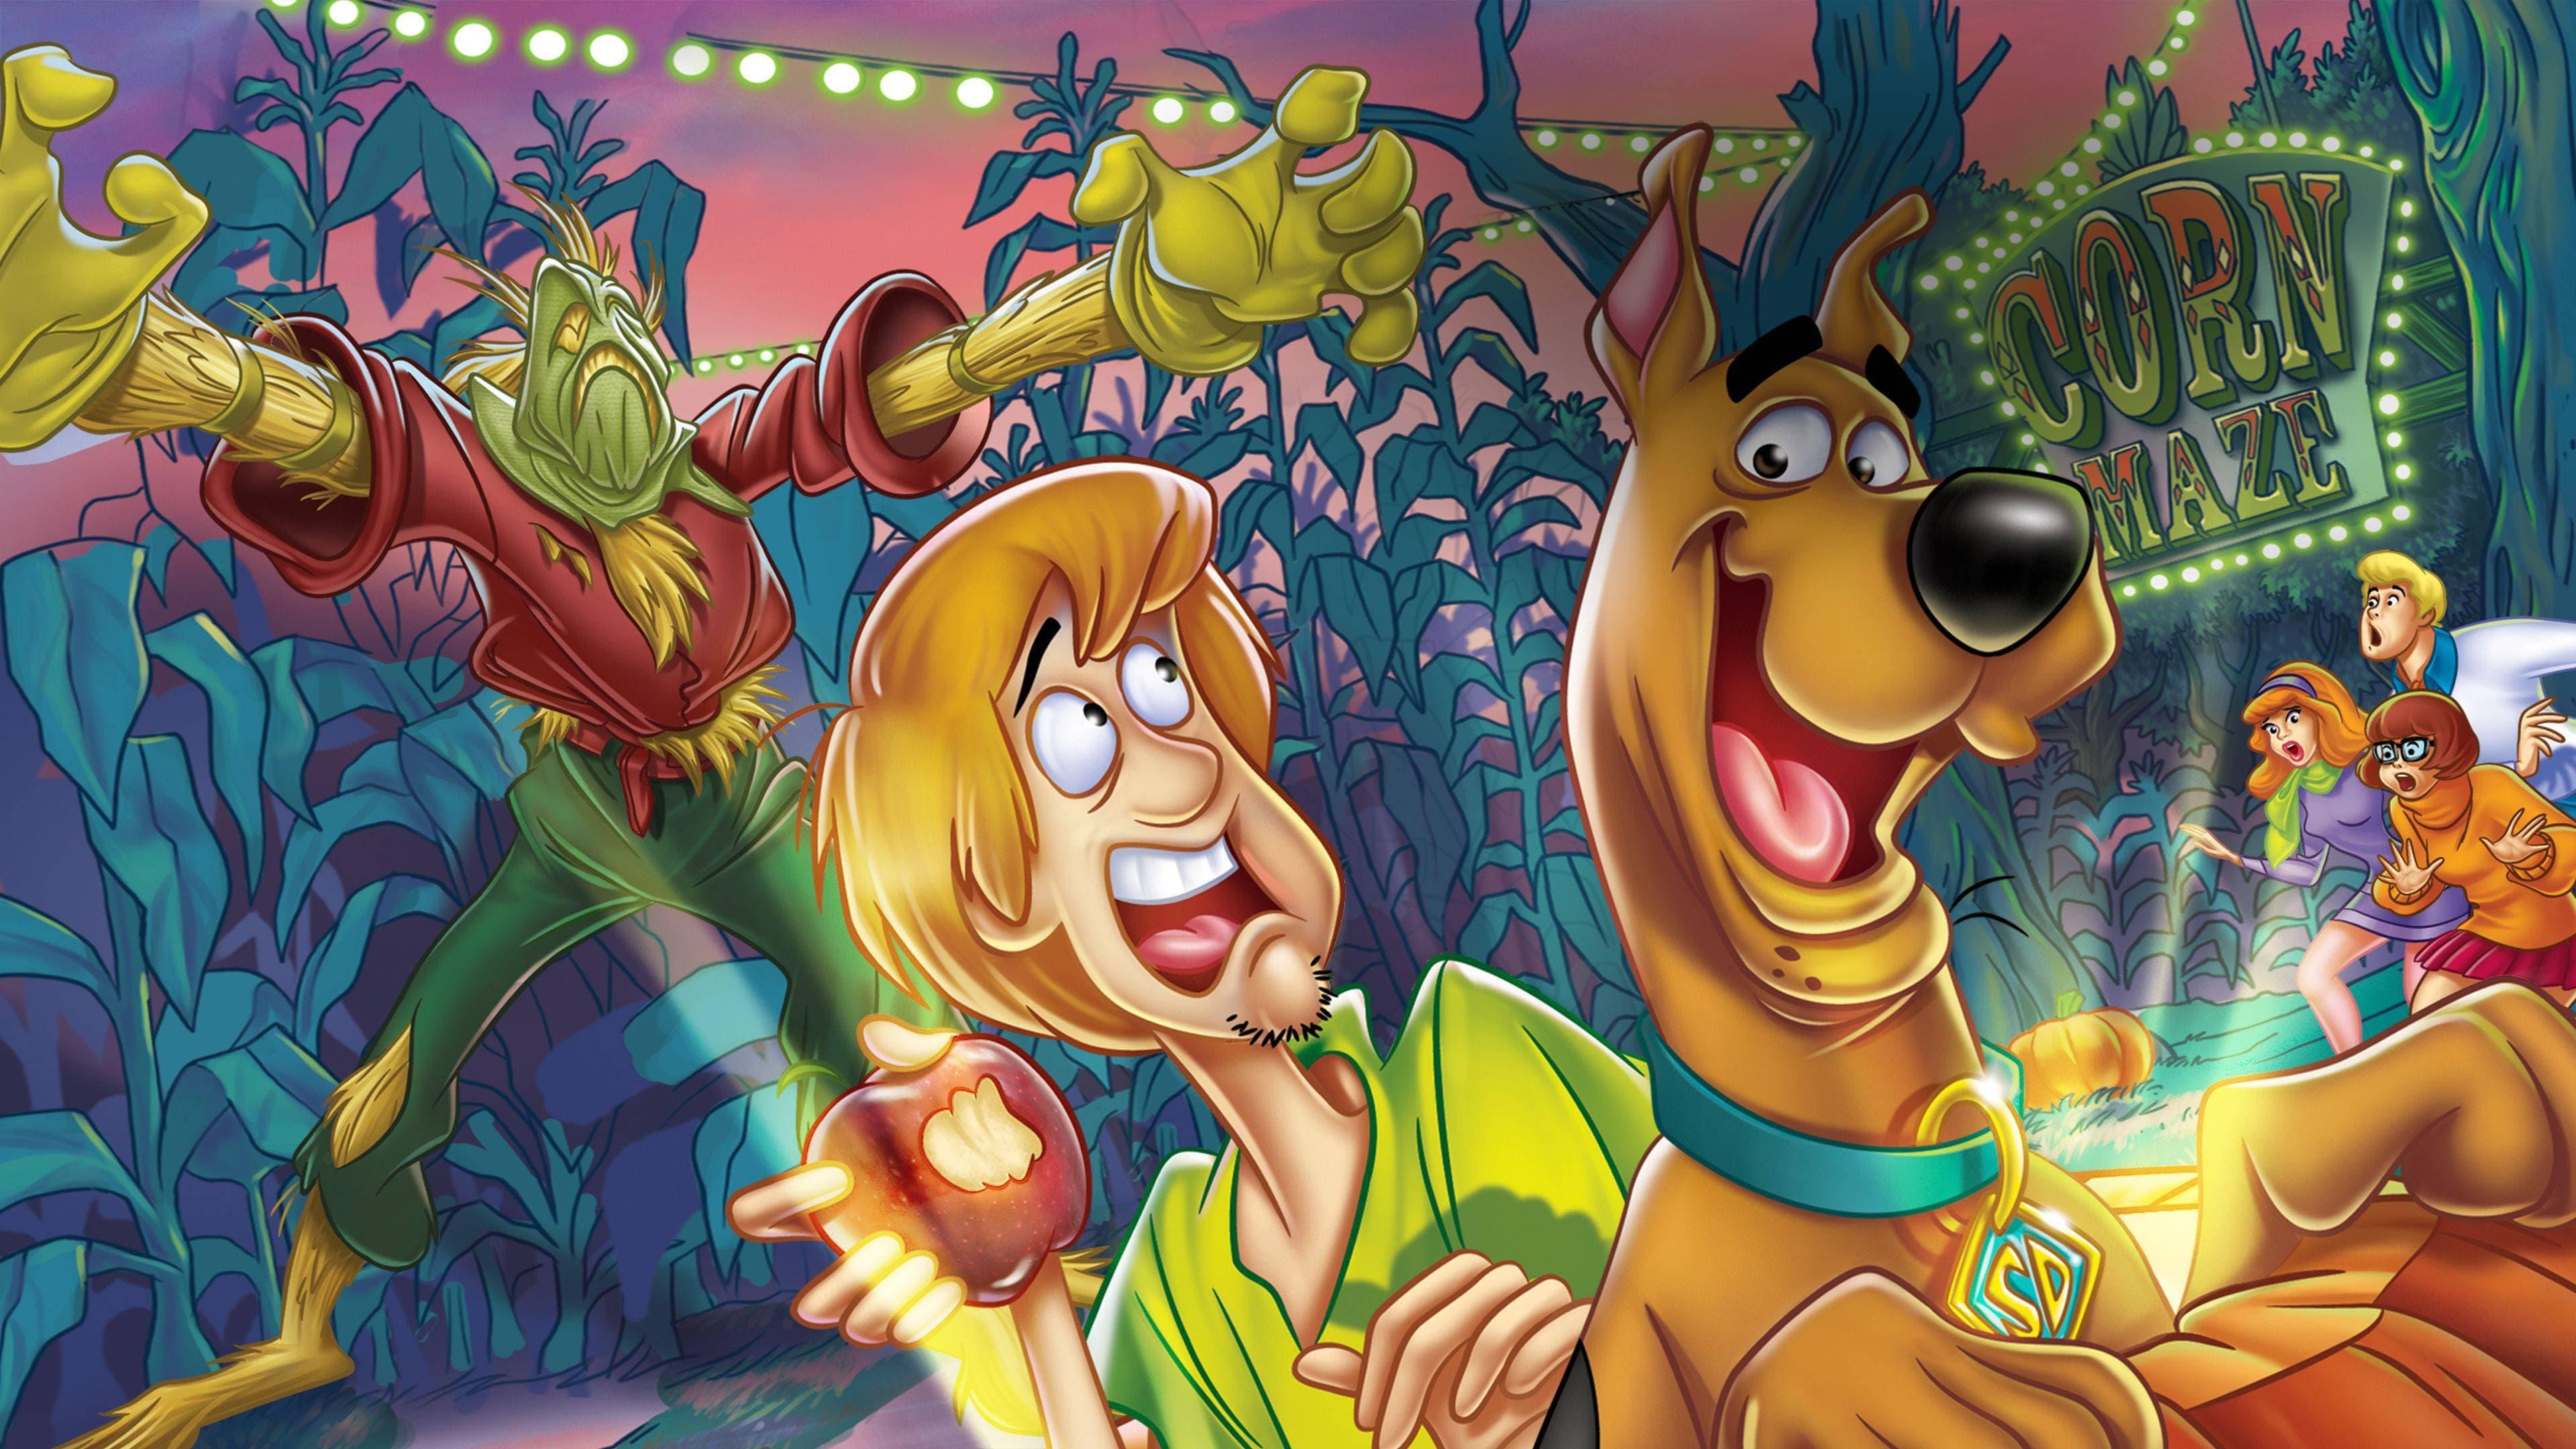 Scooby-Doo! and the Spooky Scarecrow backdrop